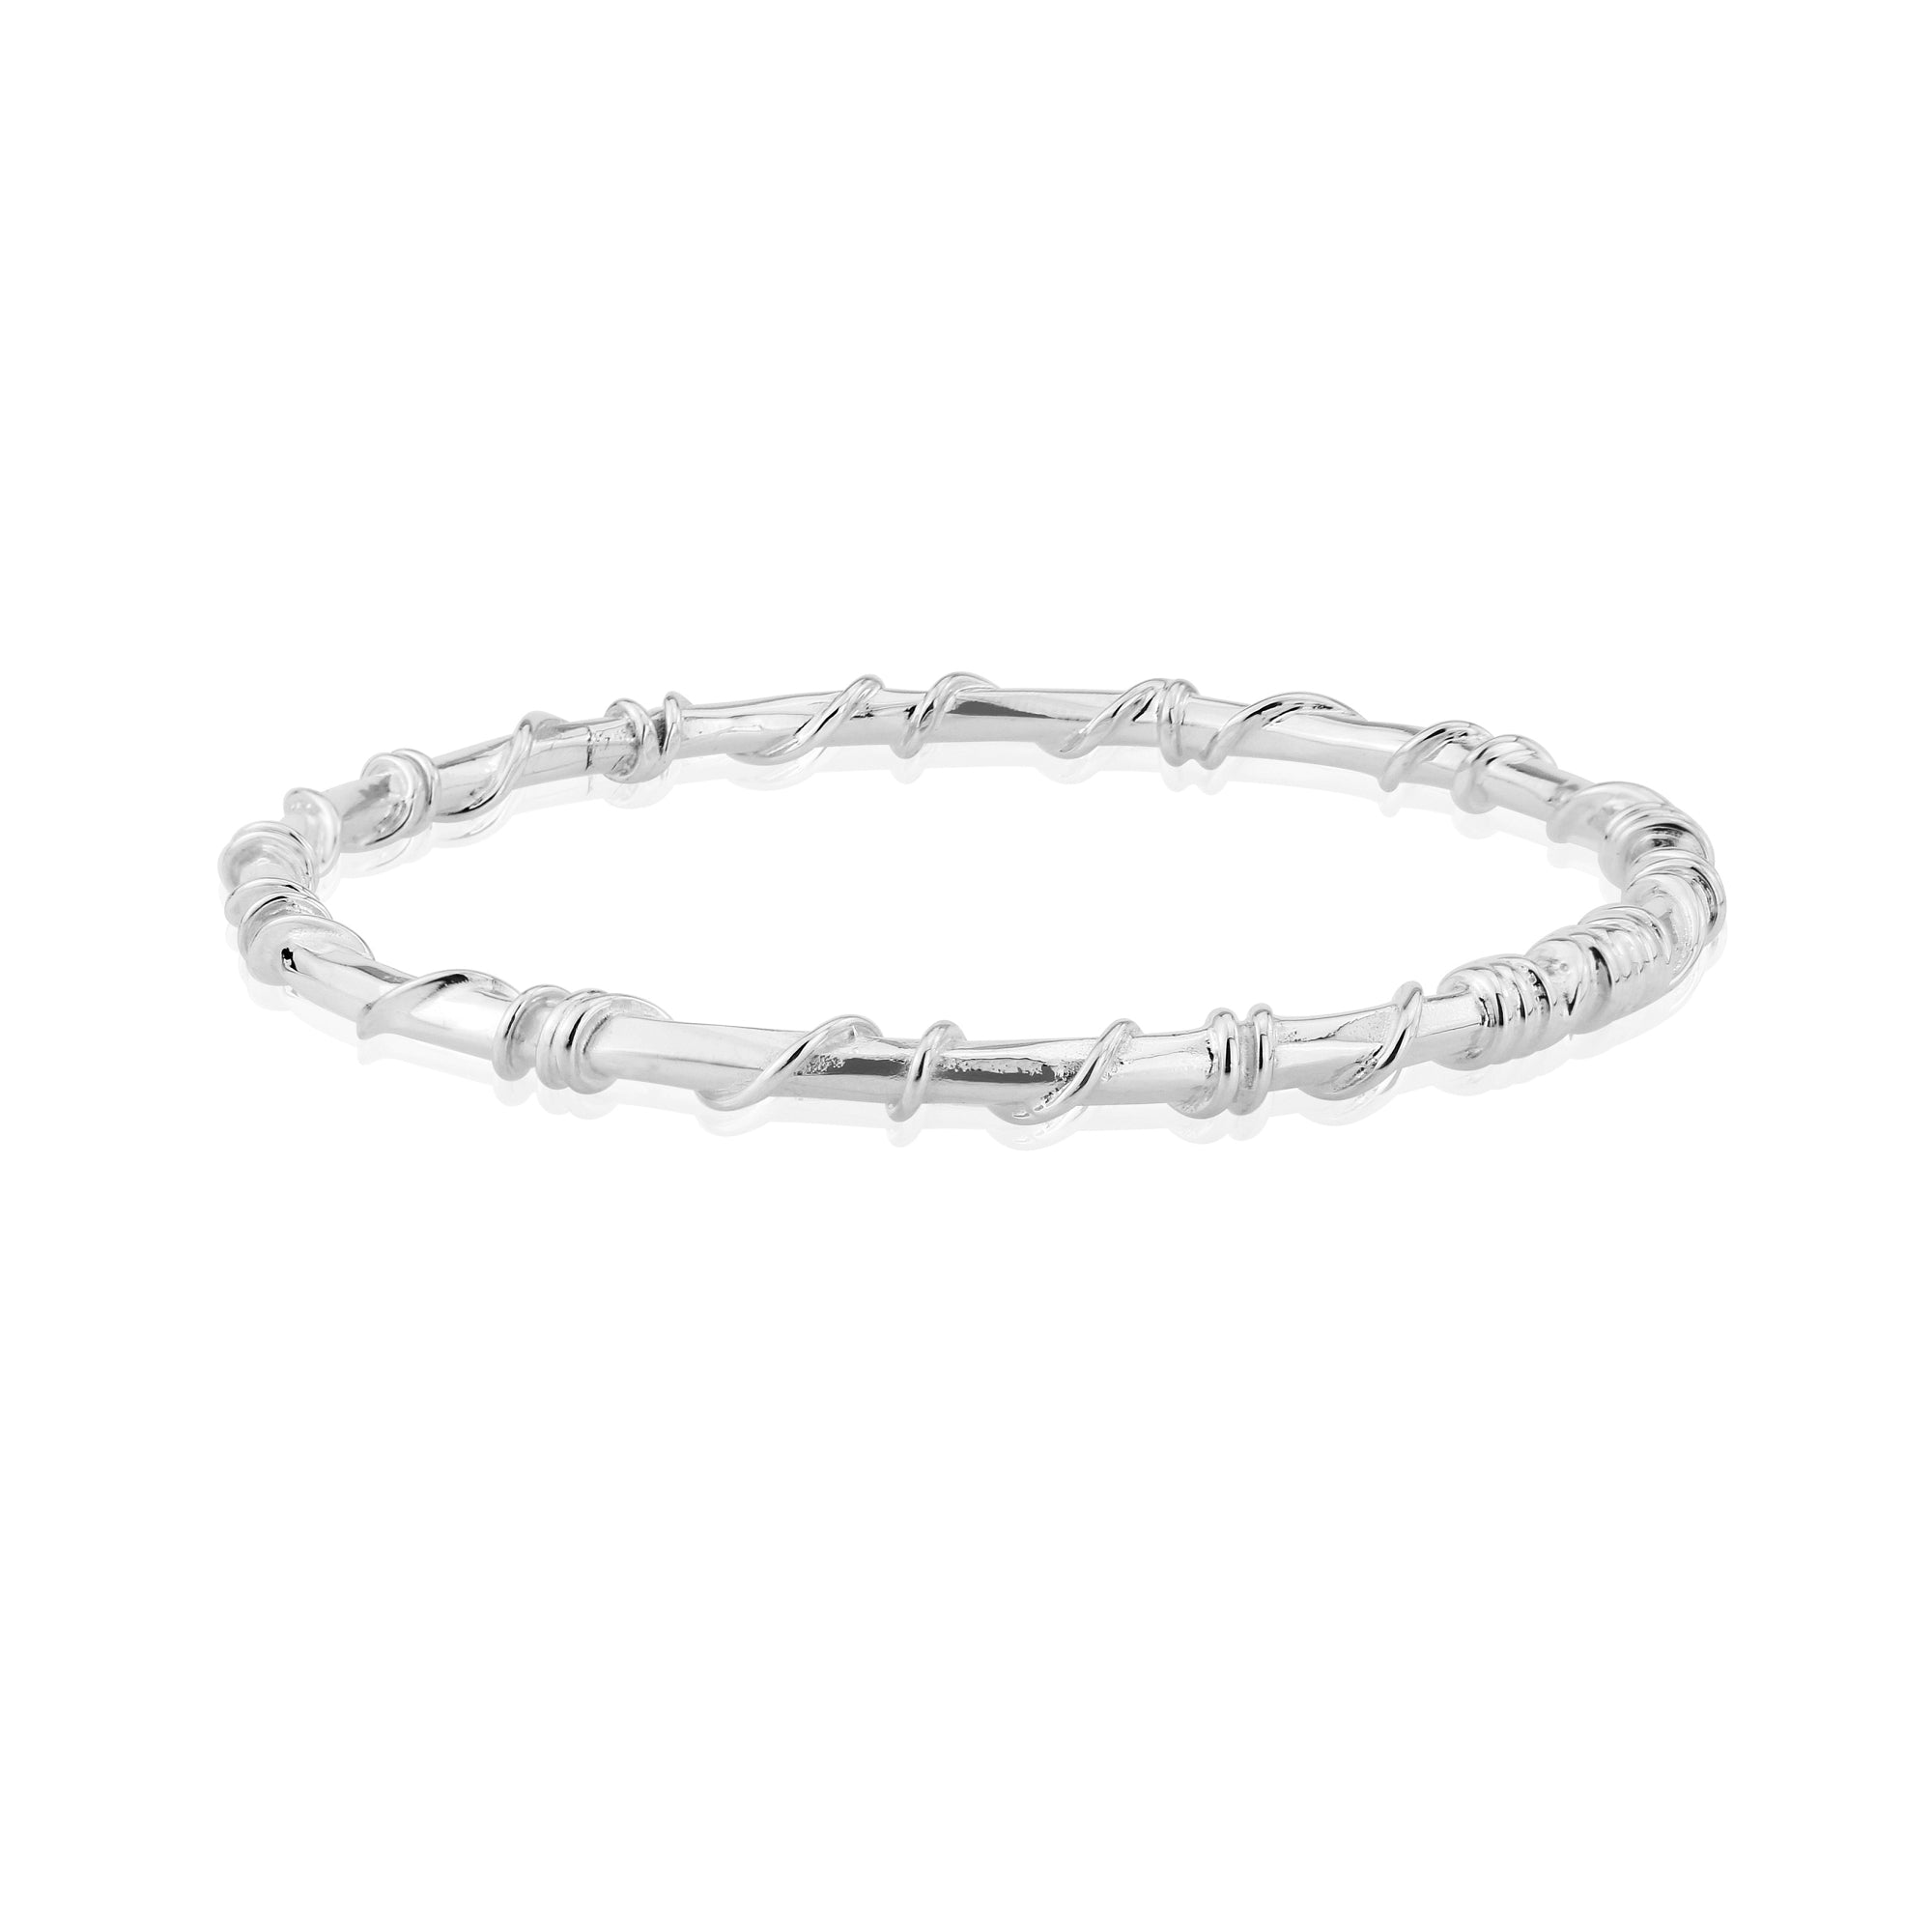 Handcrafted Silver Ivy Bangle wrapped in silver wire